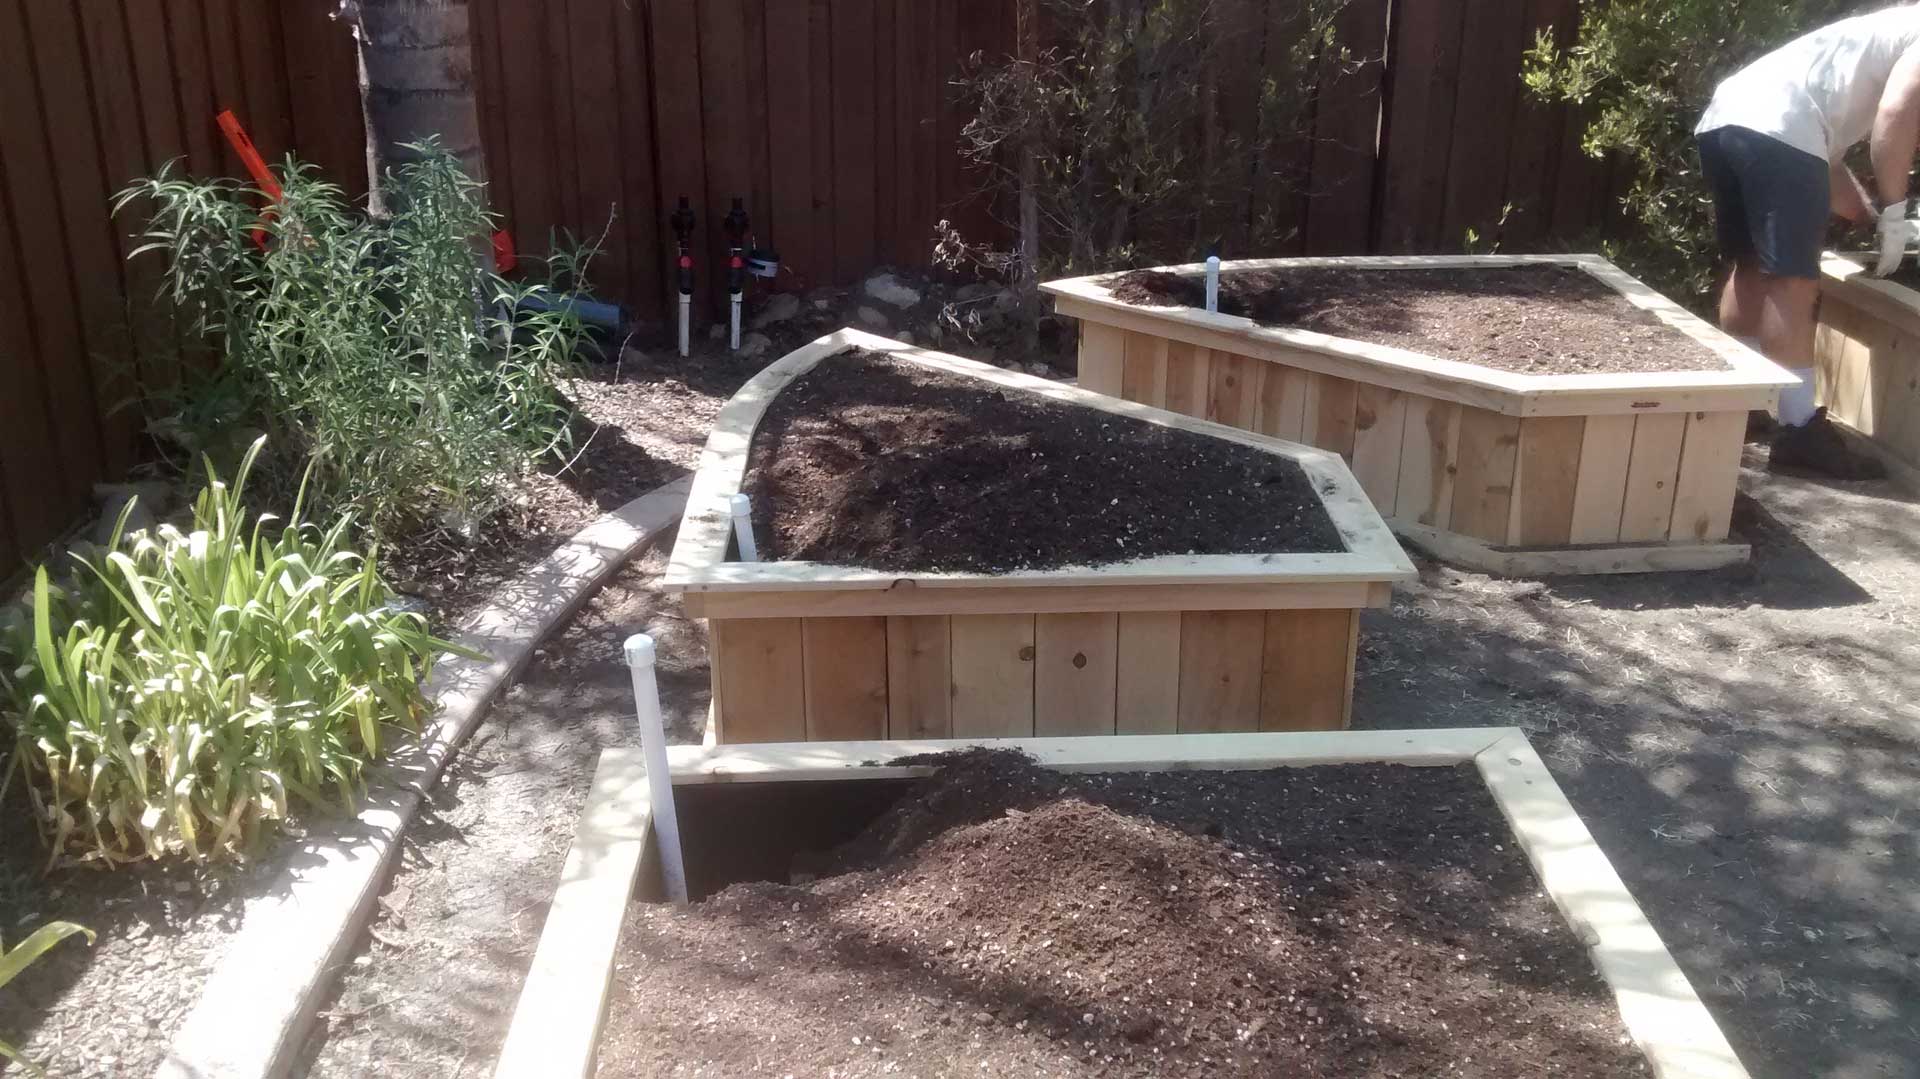 A man is working on a raised garden bed in a backyard.